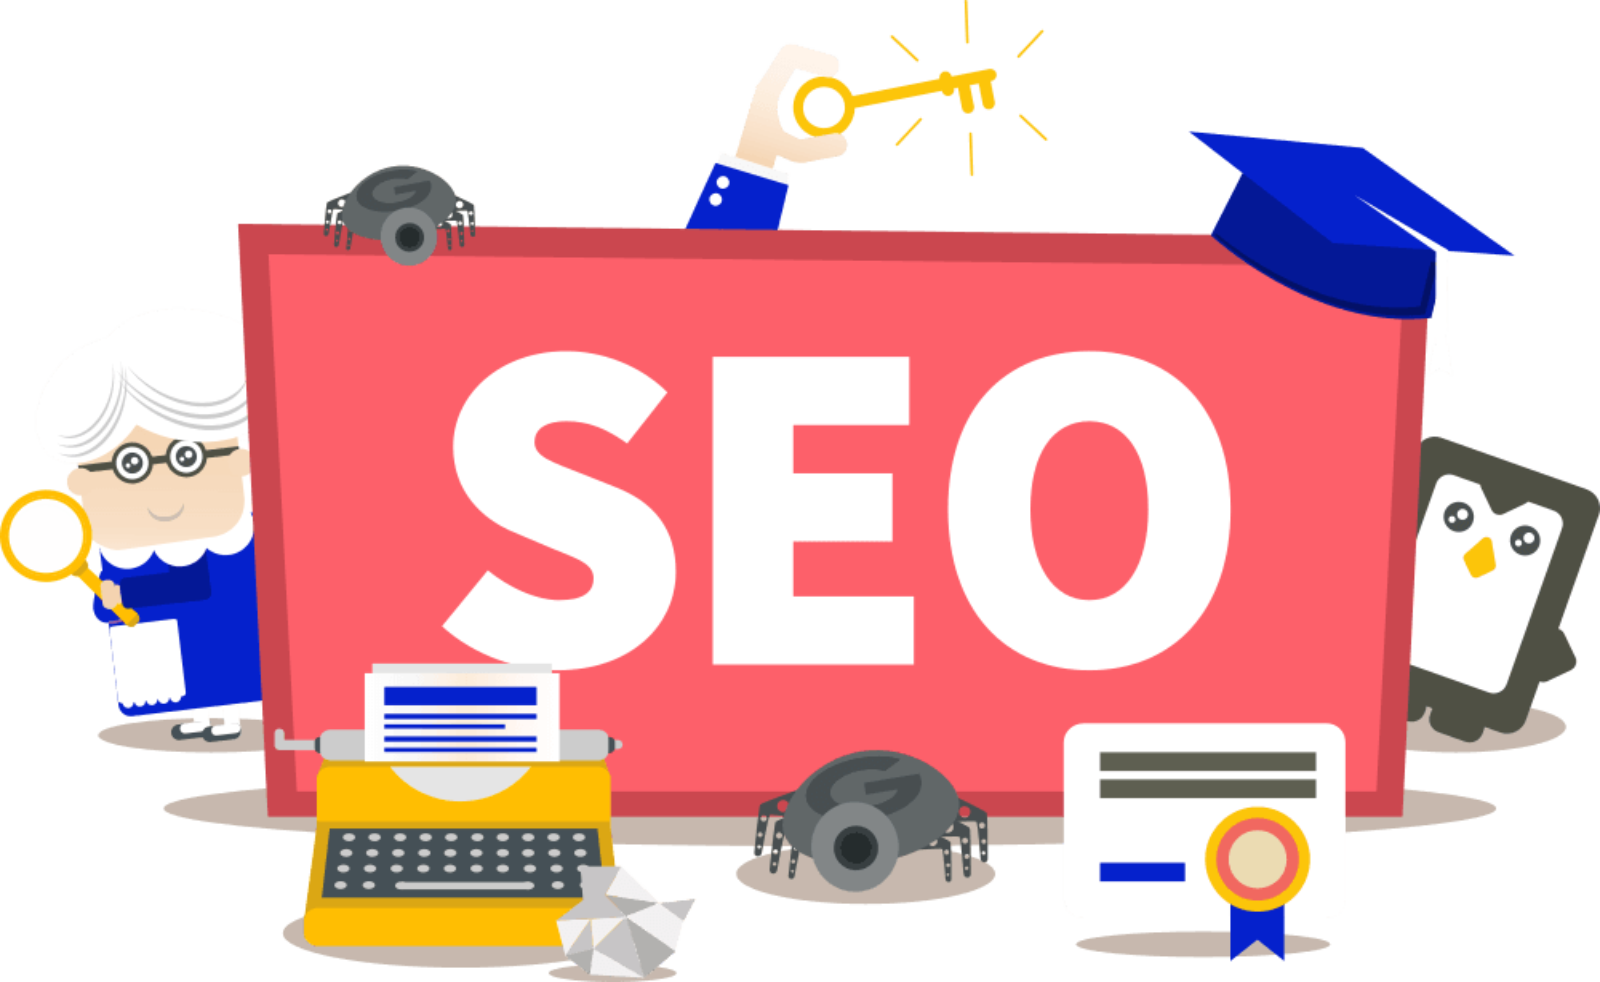 How To Buy Seo Services